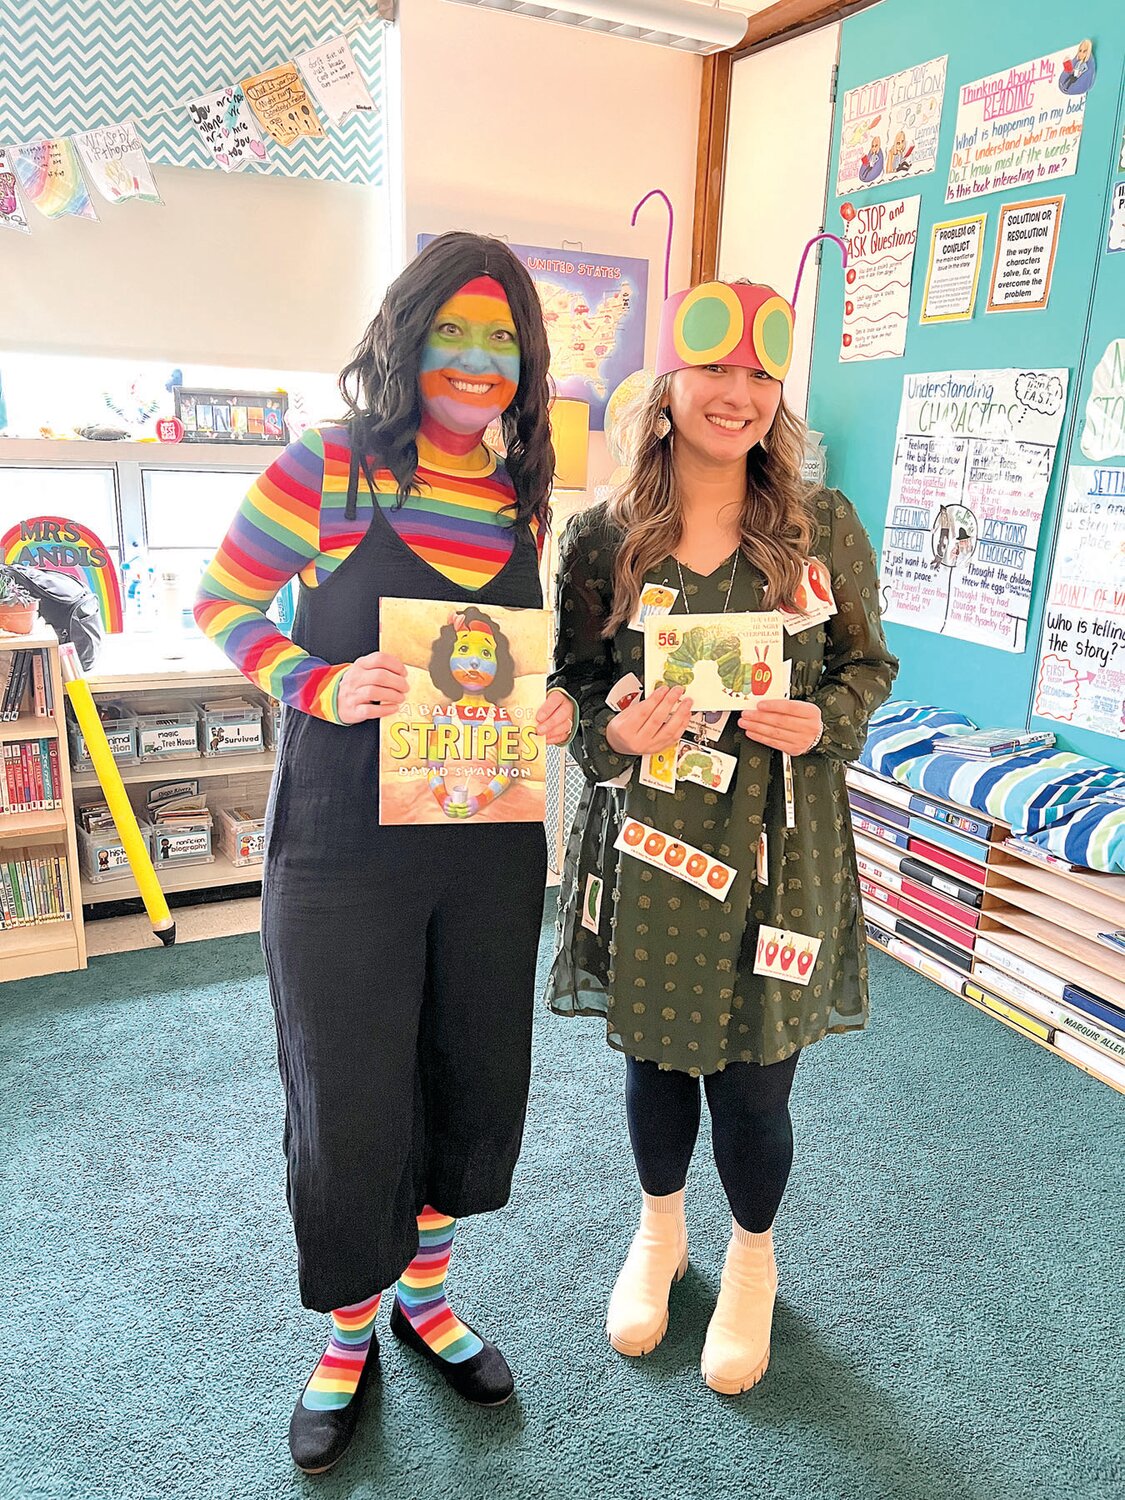 Grasse Elementary School teachers Heather Landis, left, and Sabrina Sieverts dress as the characters in “A Bad Case of Stripes” and “The Very Hungry Caterpillar.”